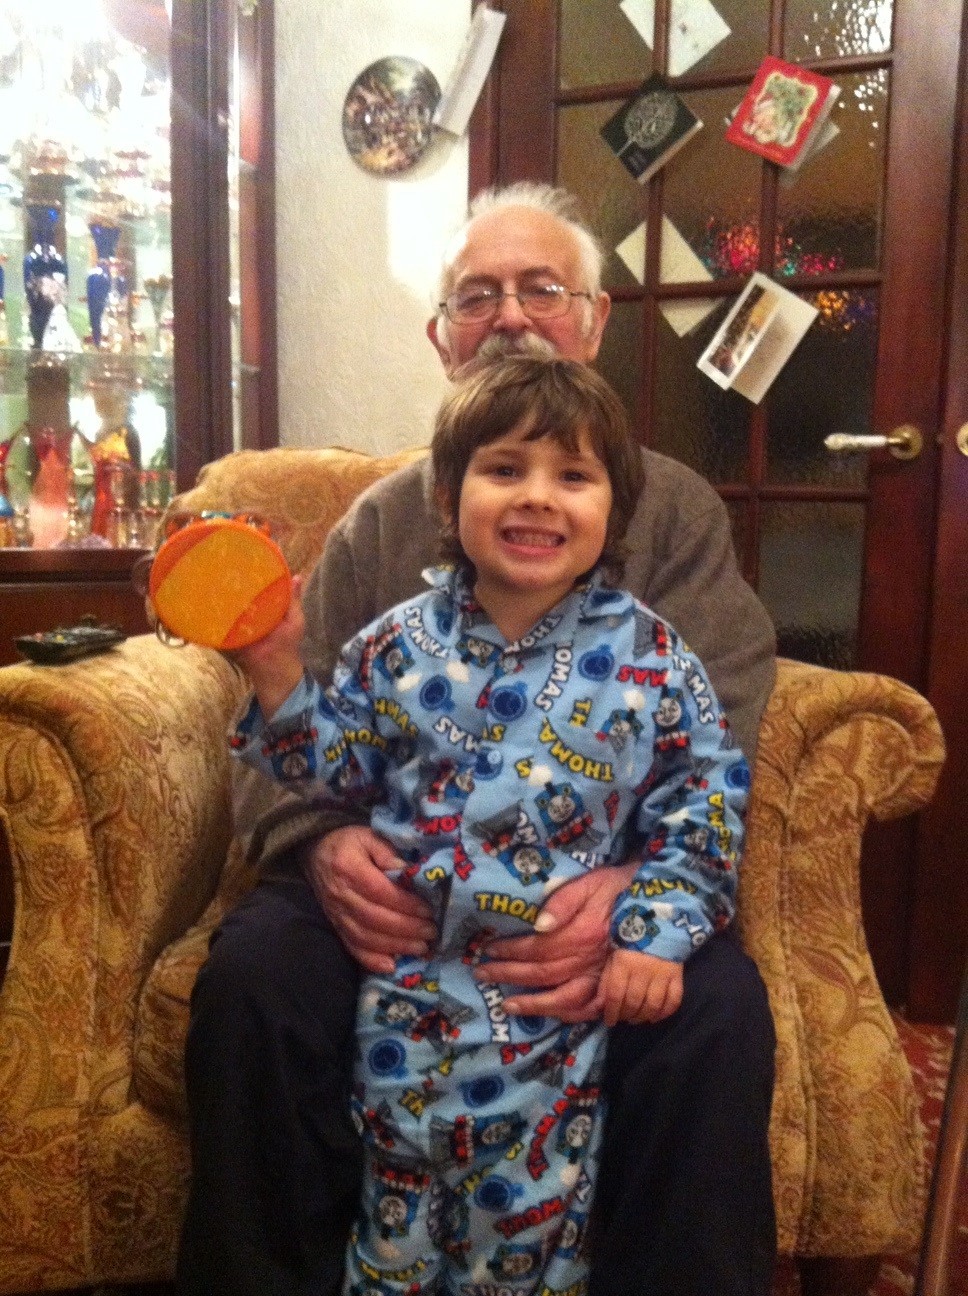 Brendan pictured with his grandson, Thom, who he loved dearly